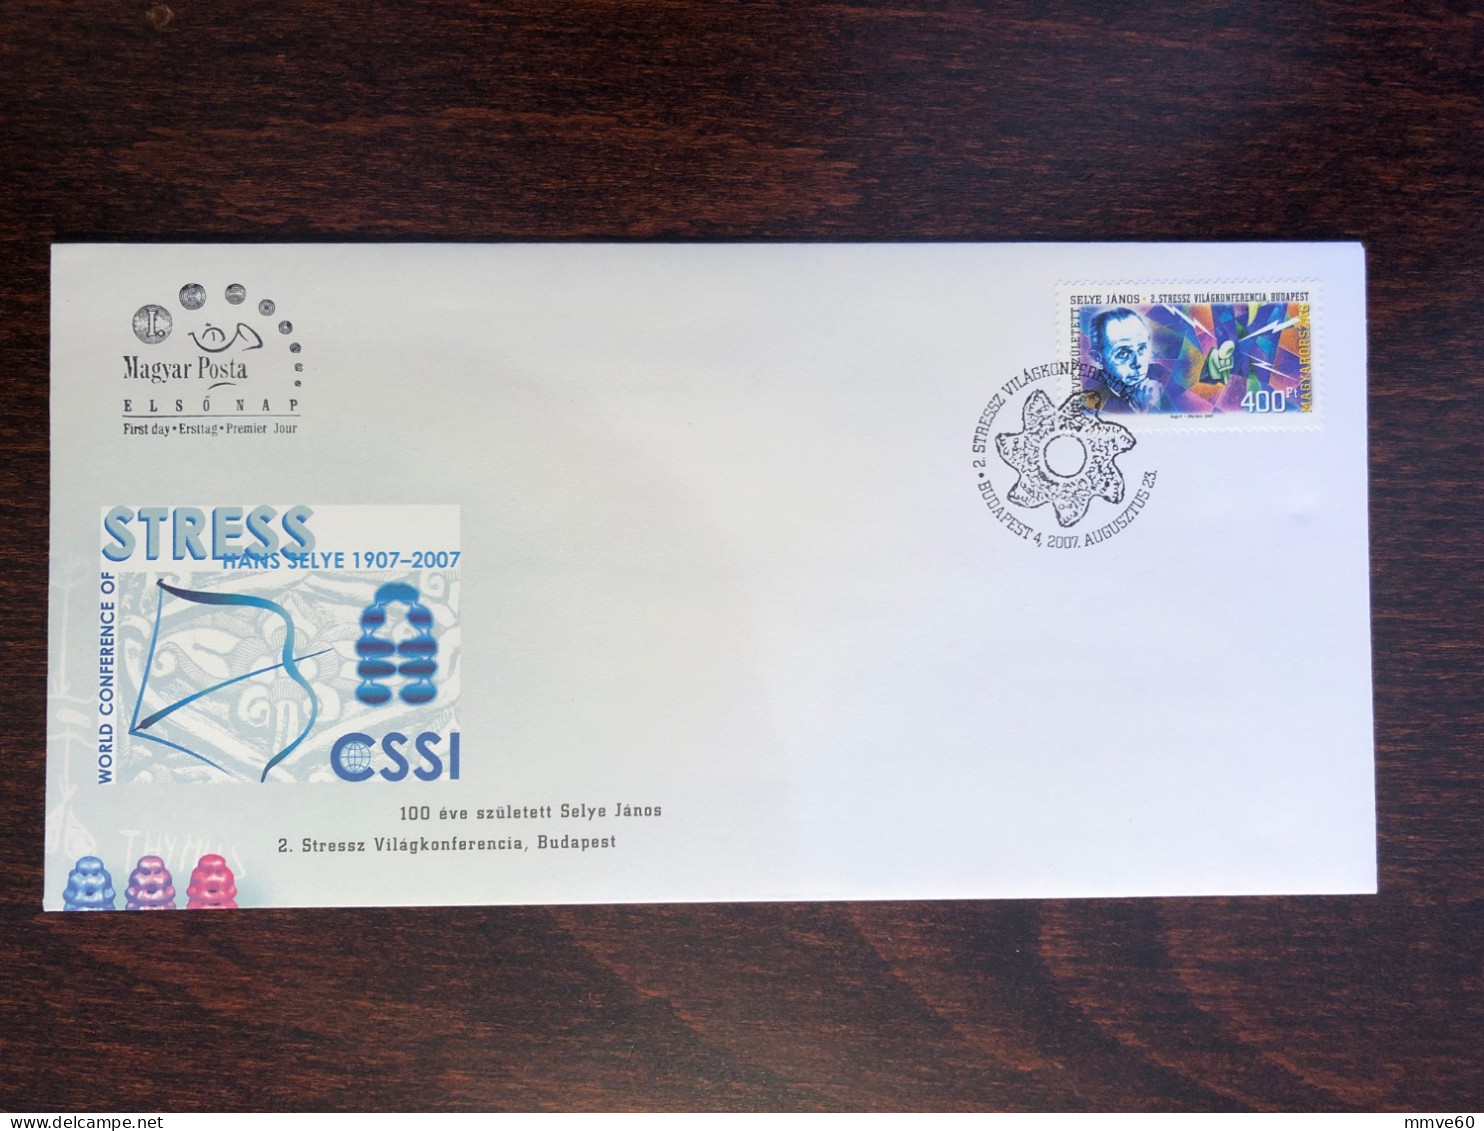 HUNGARY FDC COVER 2007 YEAR NEUROLOGY STRESS HEALTH MEDICINE STAMPS - FDC